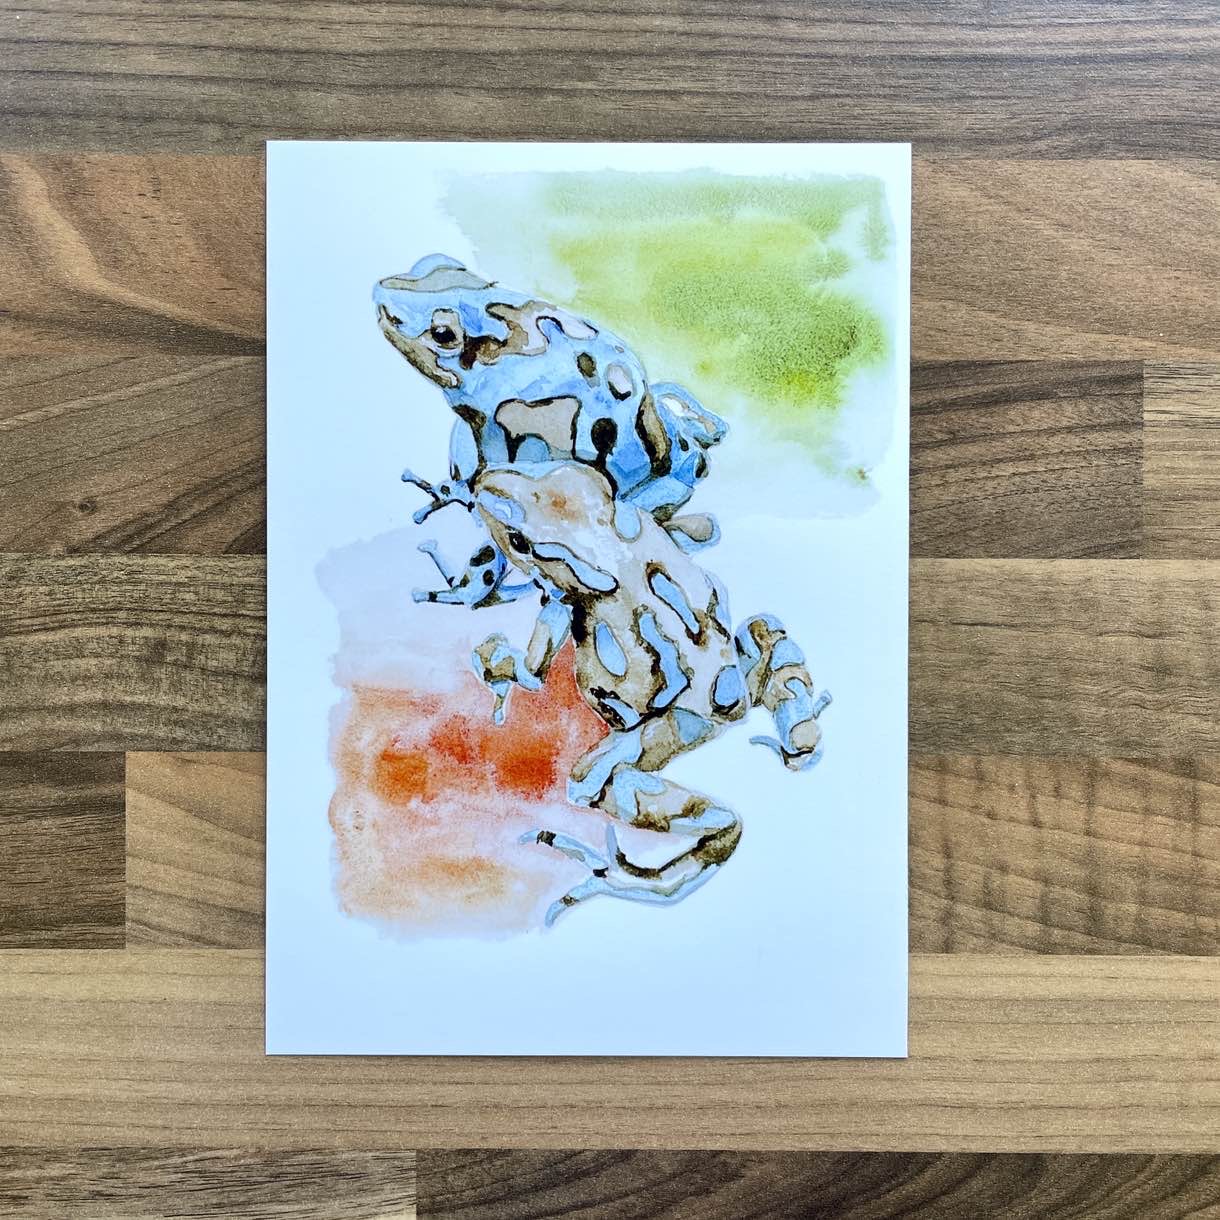 Watercolour painting of two poison dart frogs